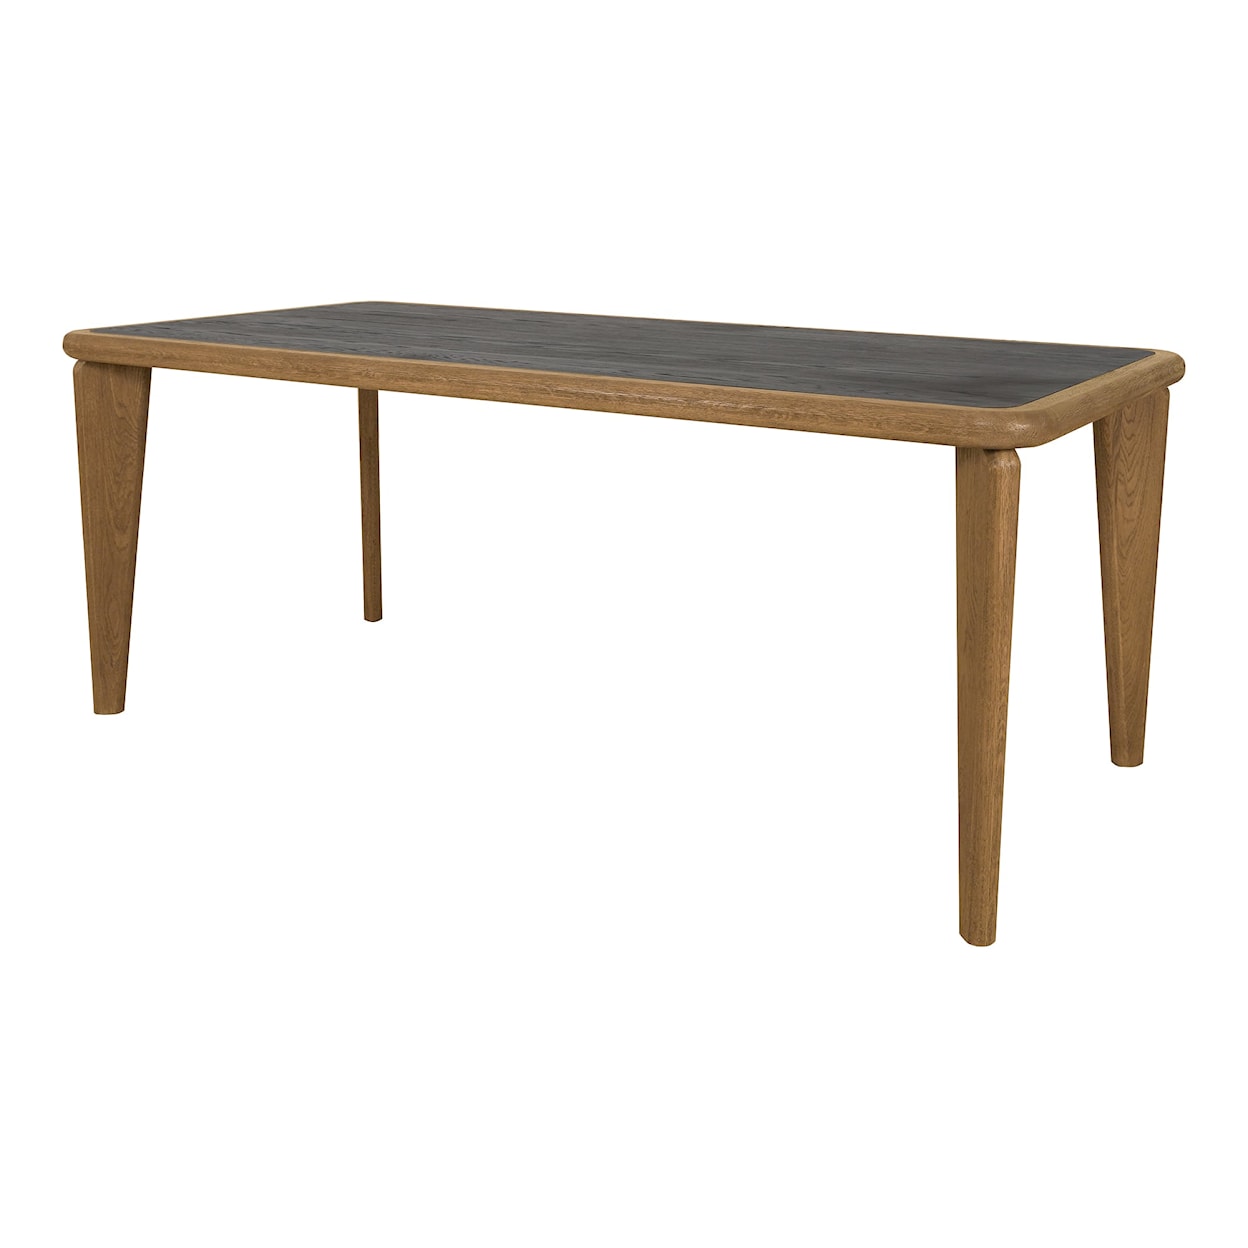 Moe's Home Collection Loden Dining Table